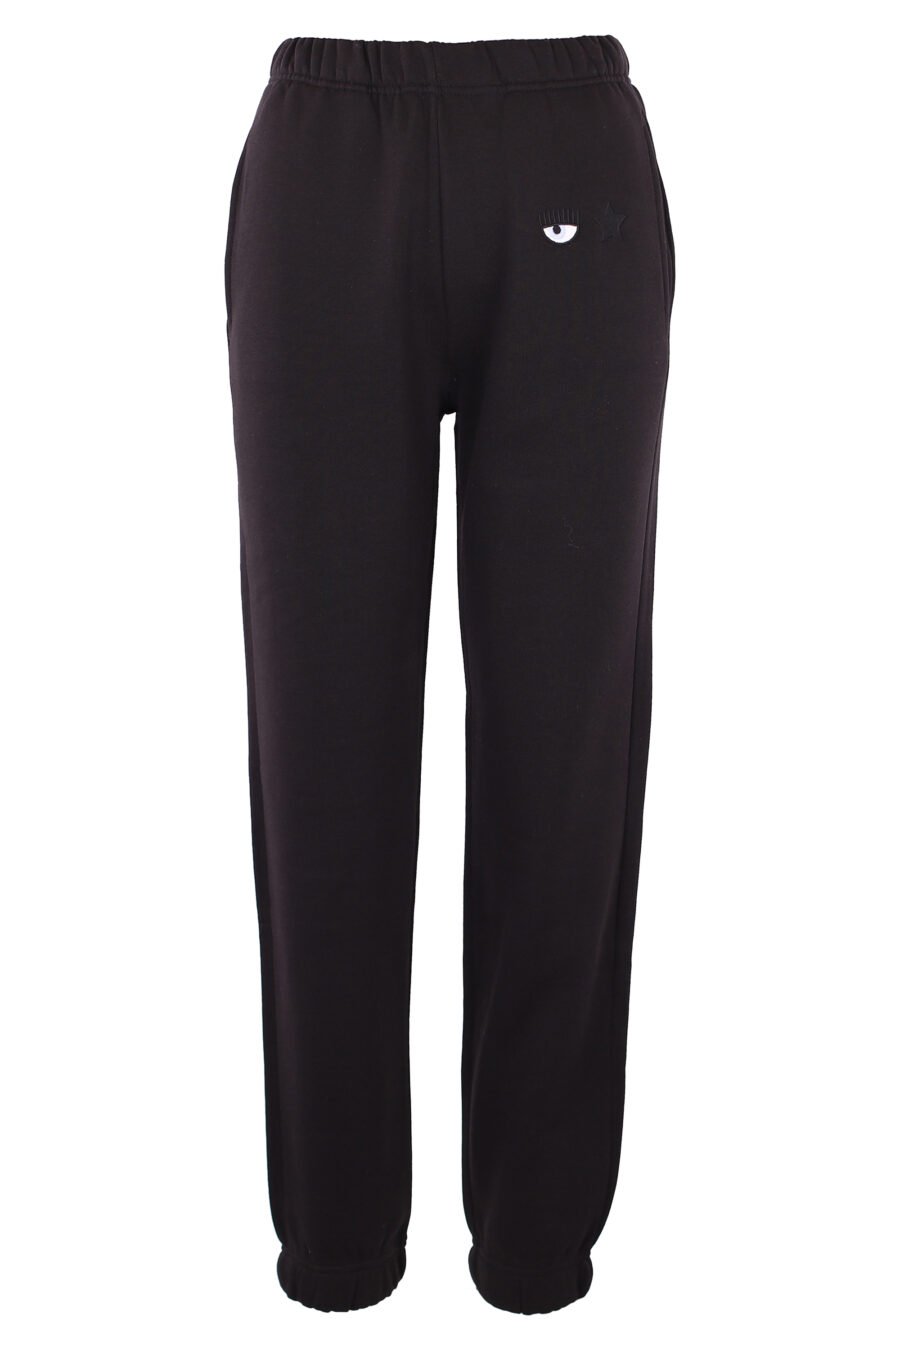 Tracksuit bottoms black with eye and star logo - IMG 6343